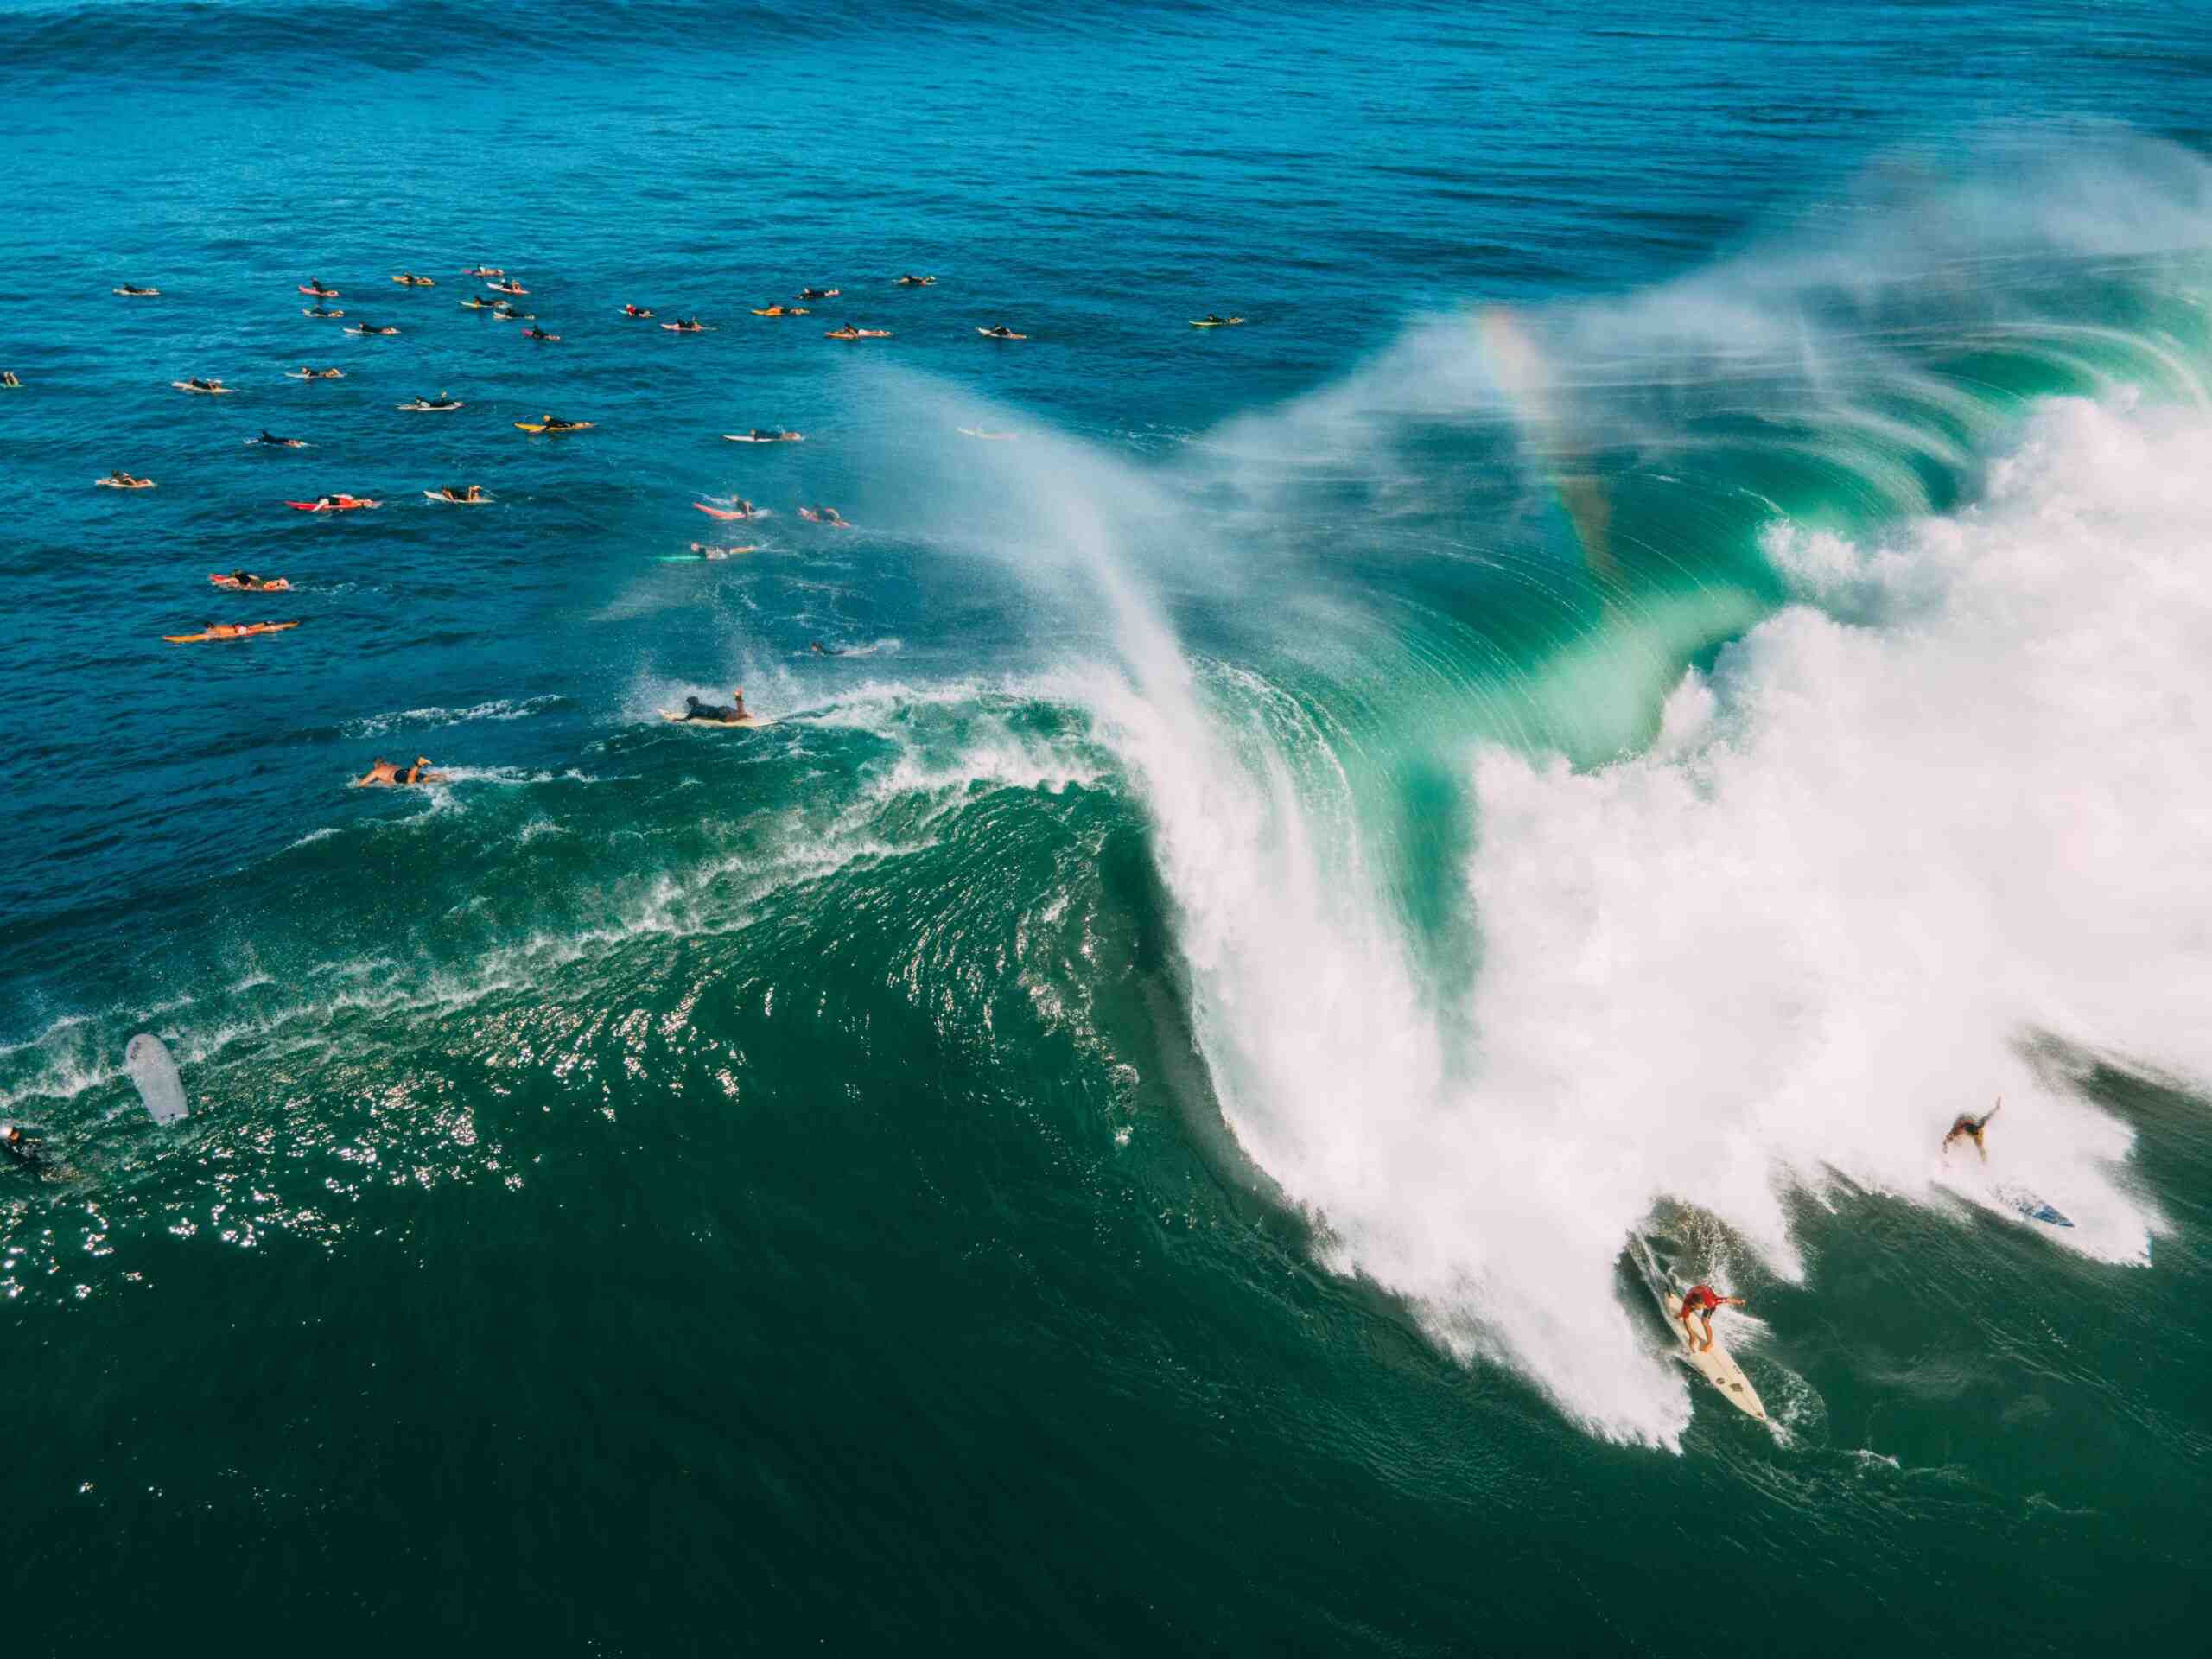 How do surfers deal with big waves?